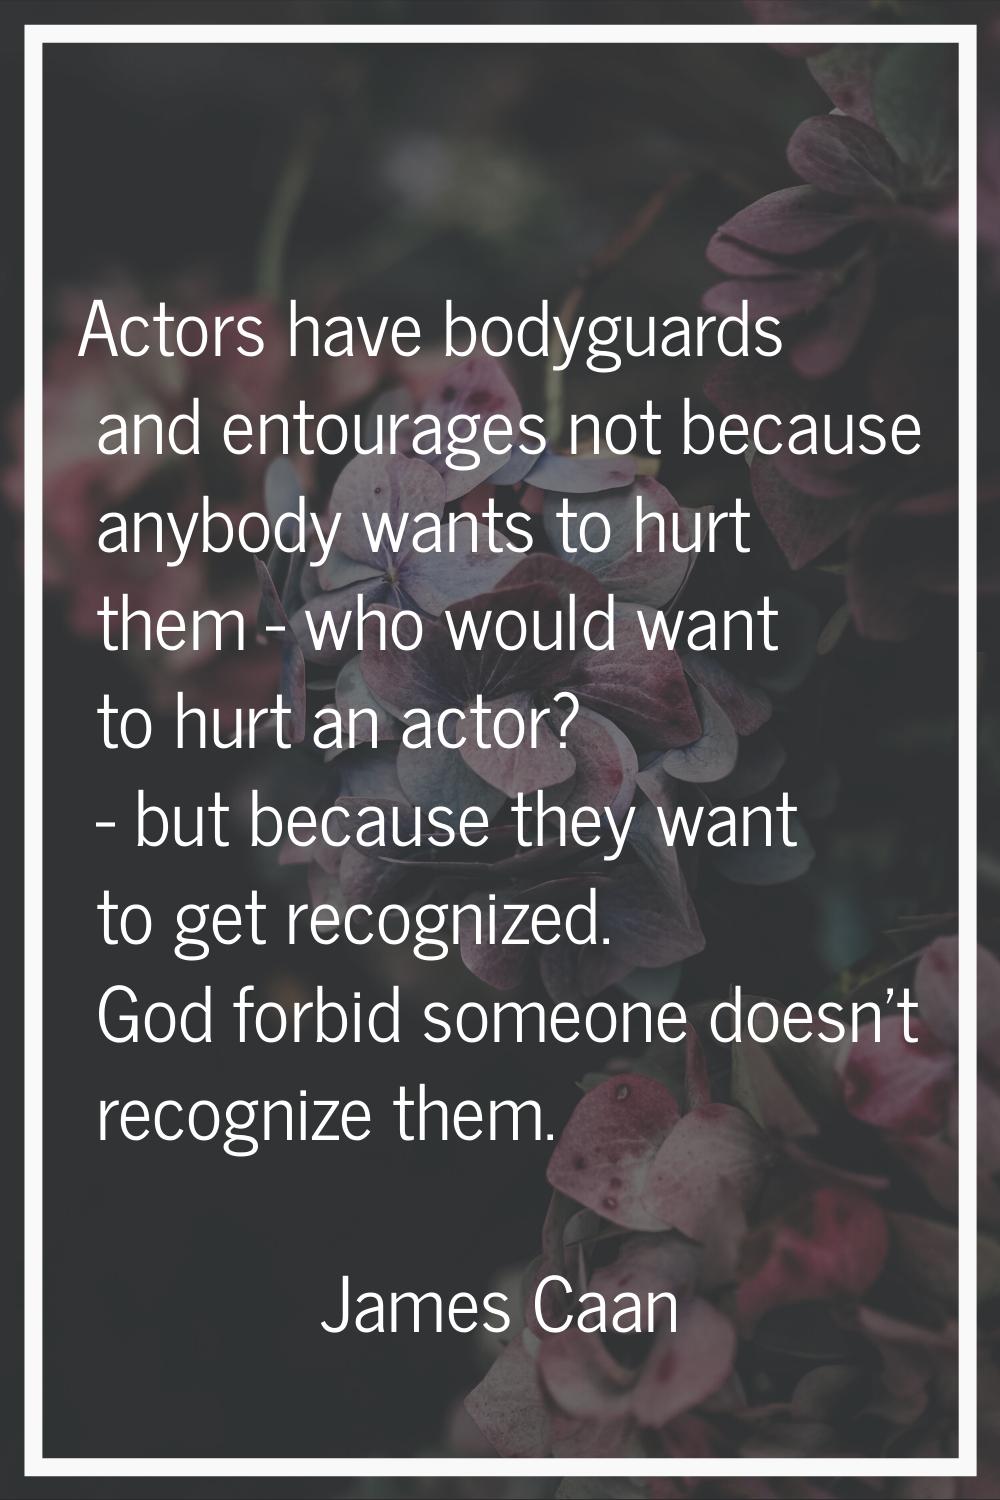 Actors have bodyguards and entourages not because anybody wants to hurt them - who would want to hu